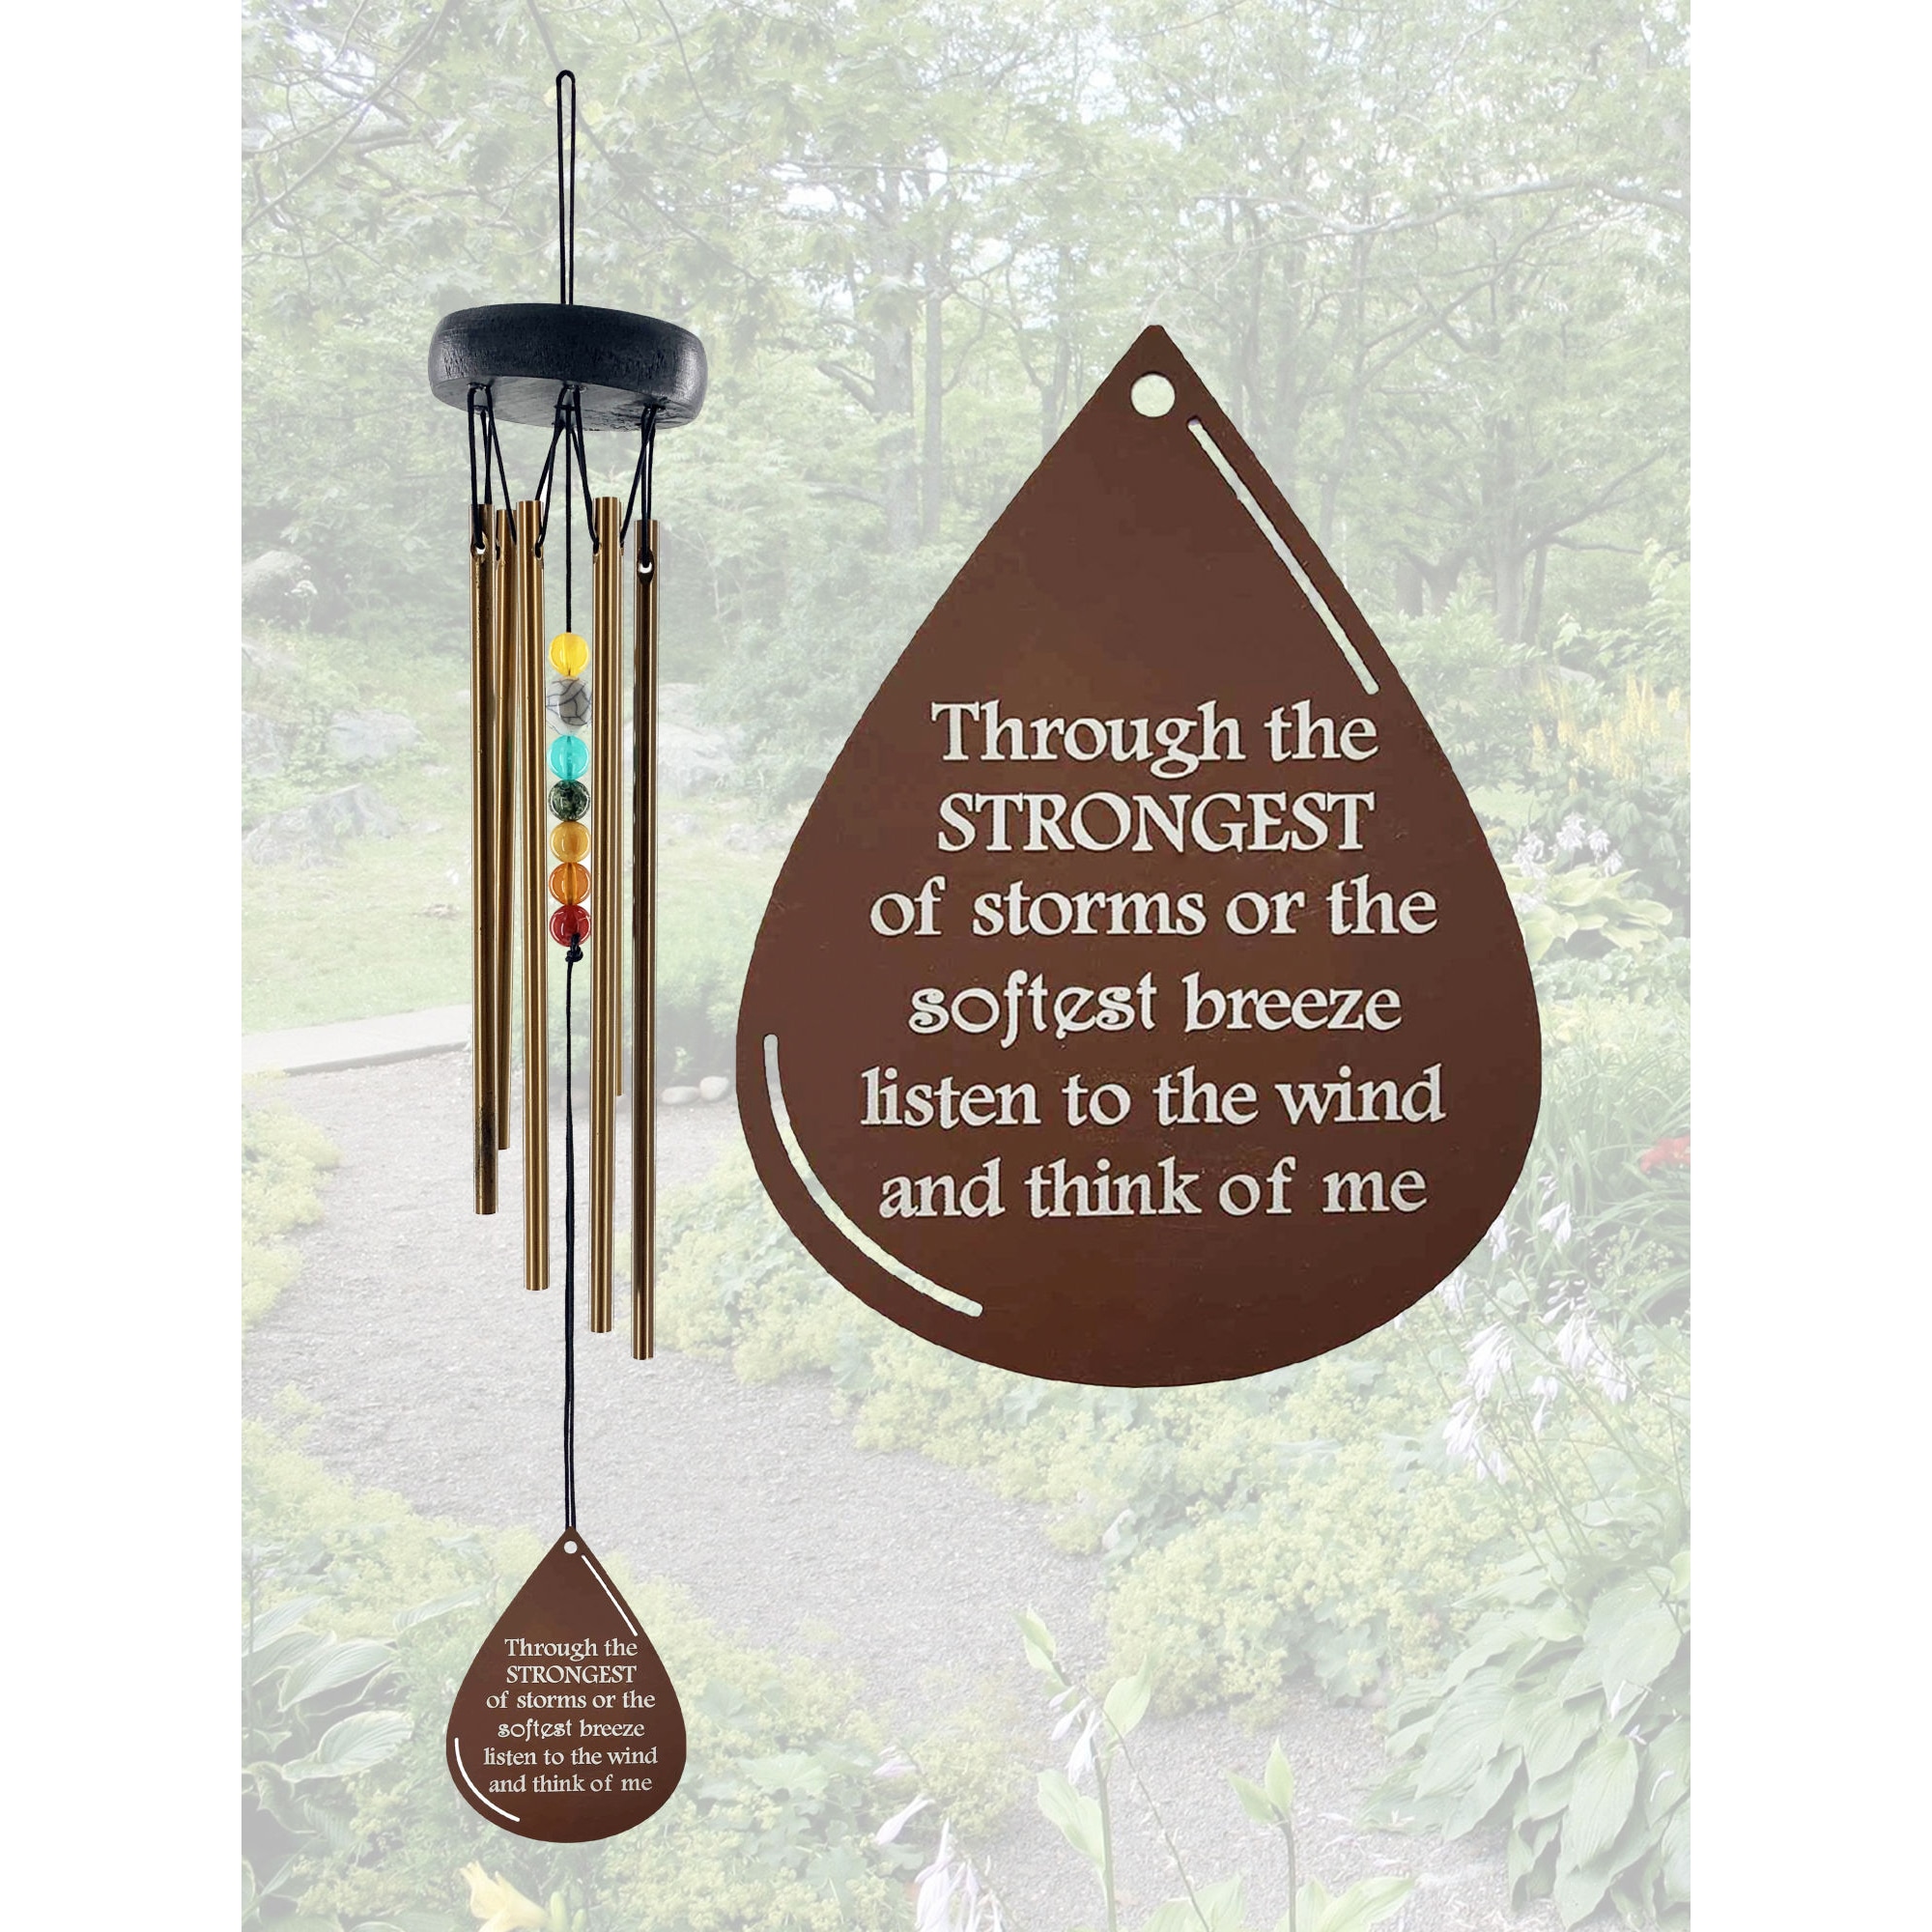 Buy Bits and PiecesHorse Wind Chimes with Bell - 36 Long from